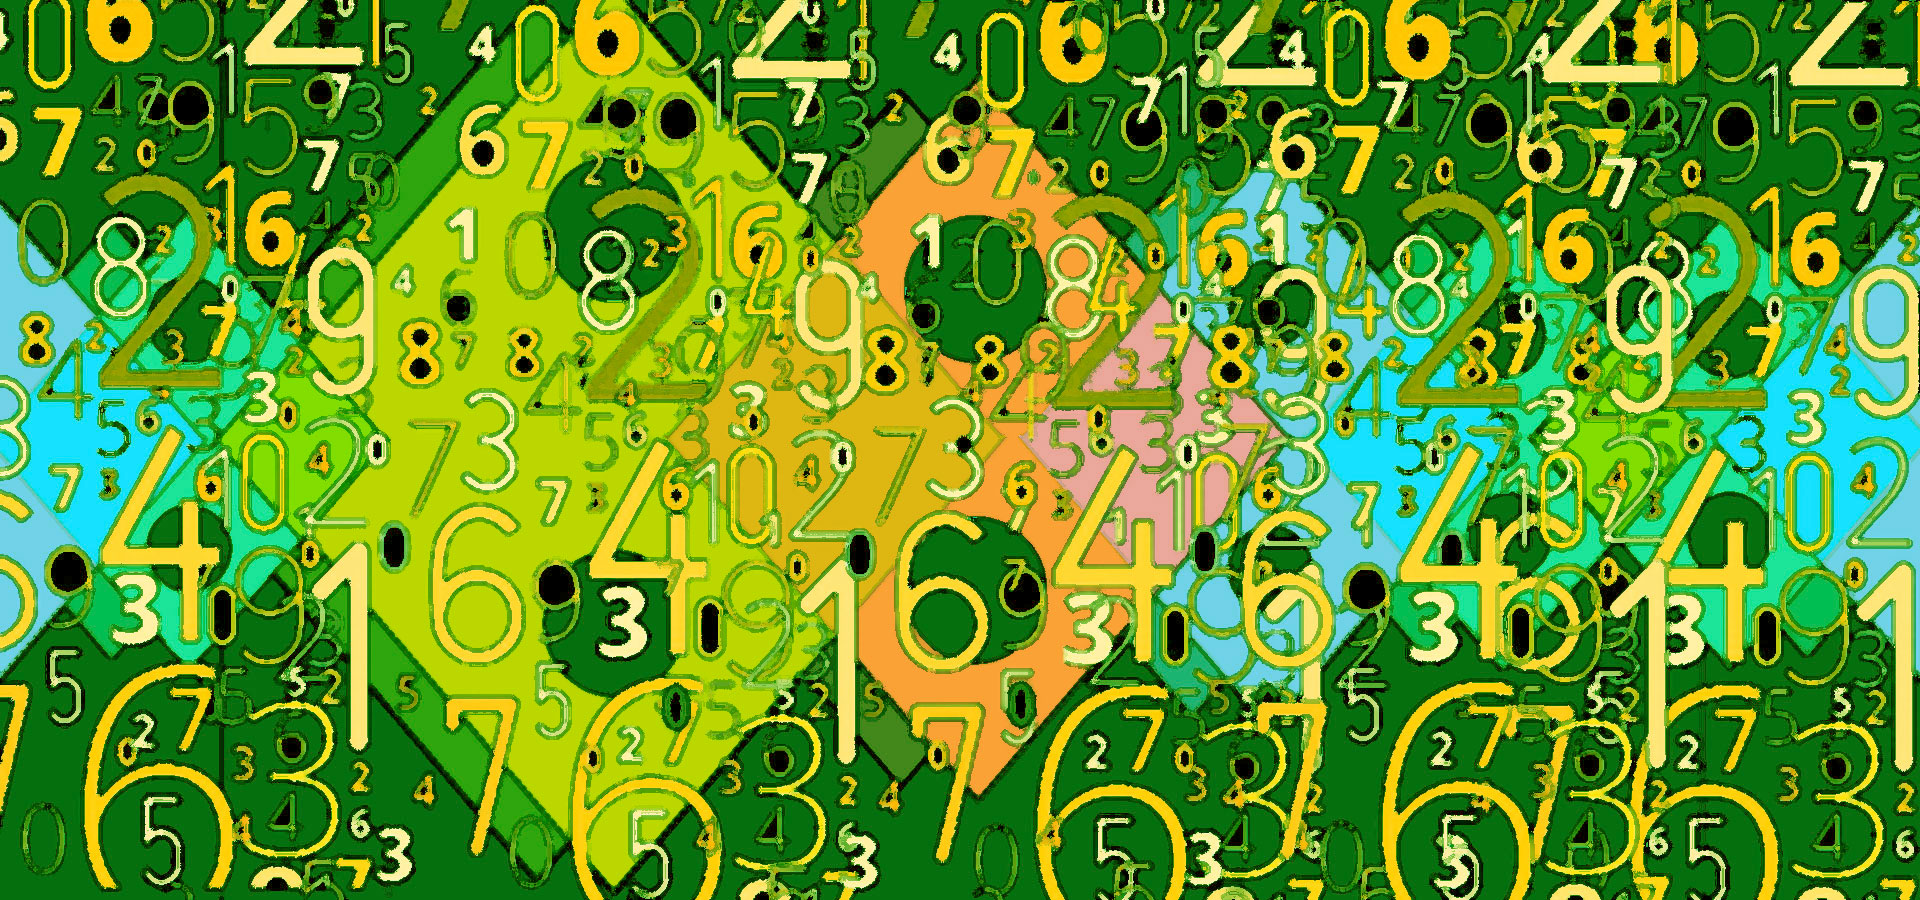 Numerology | Number Meaning